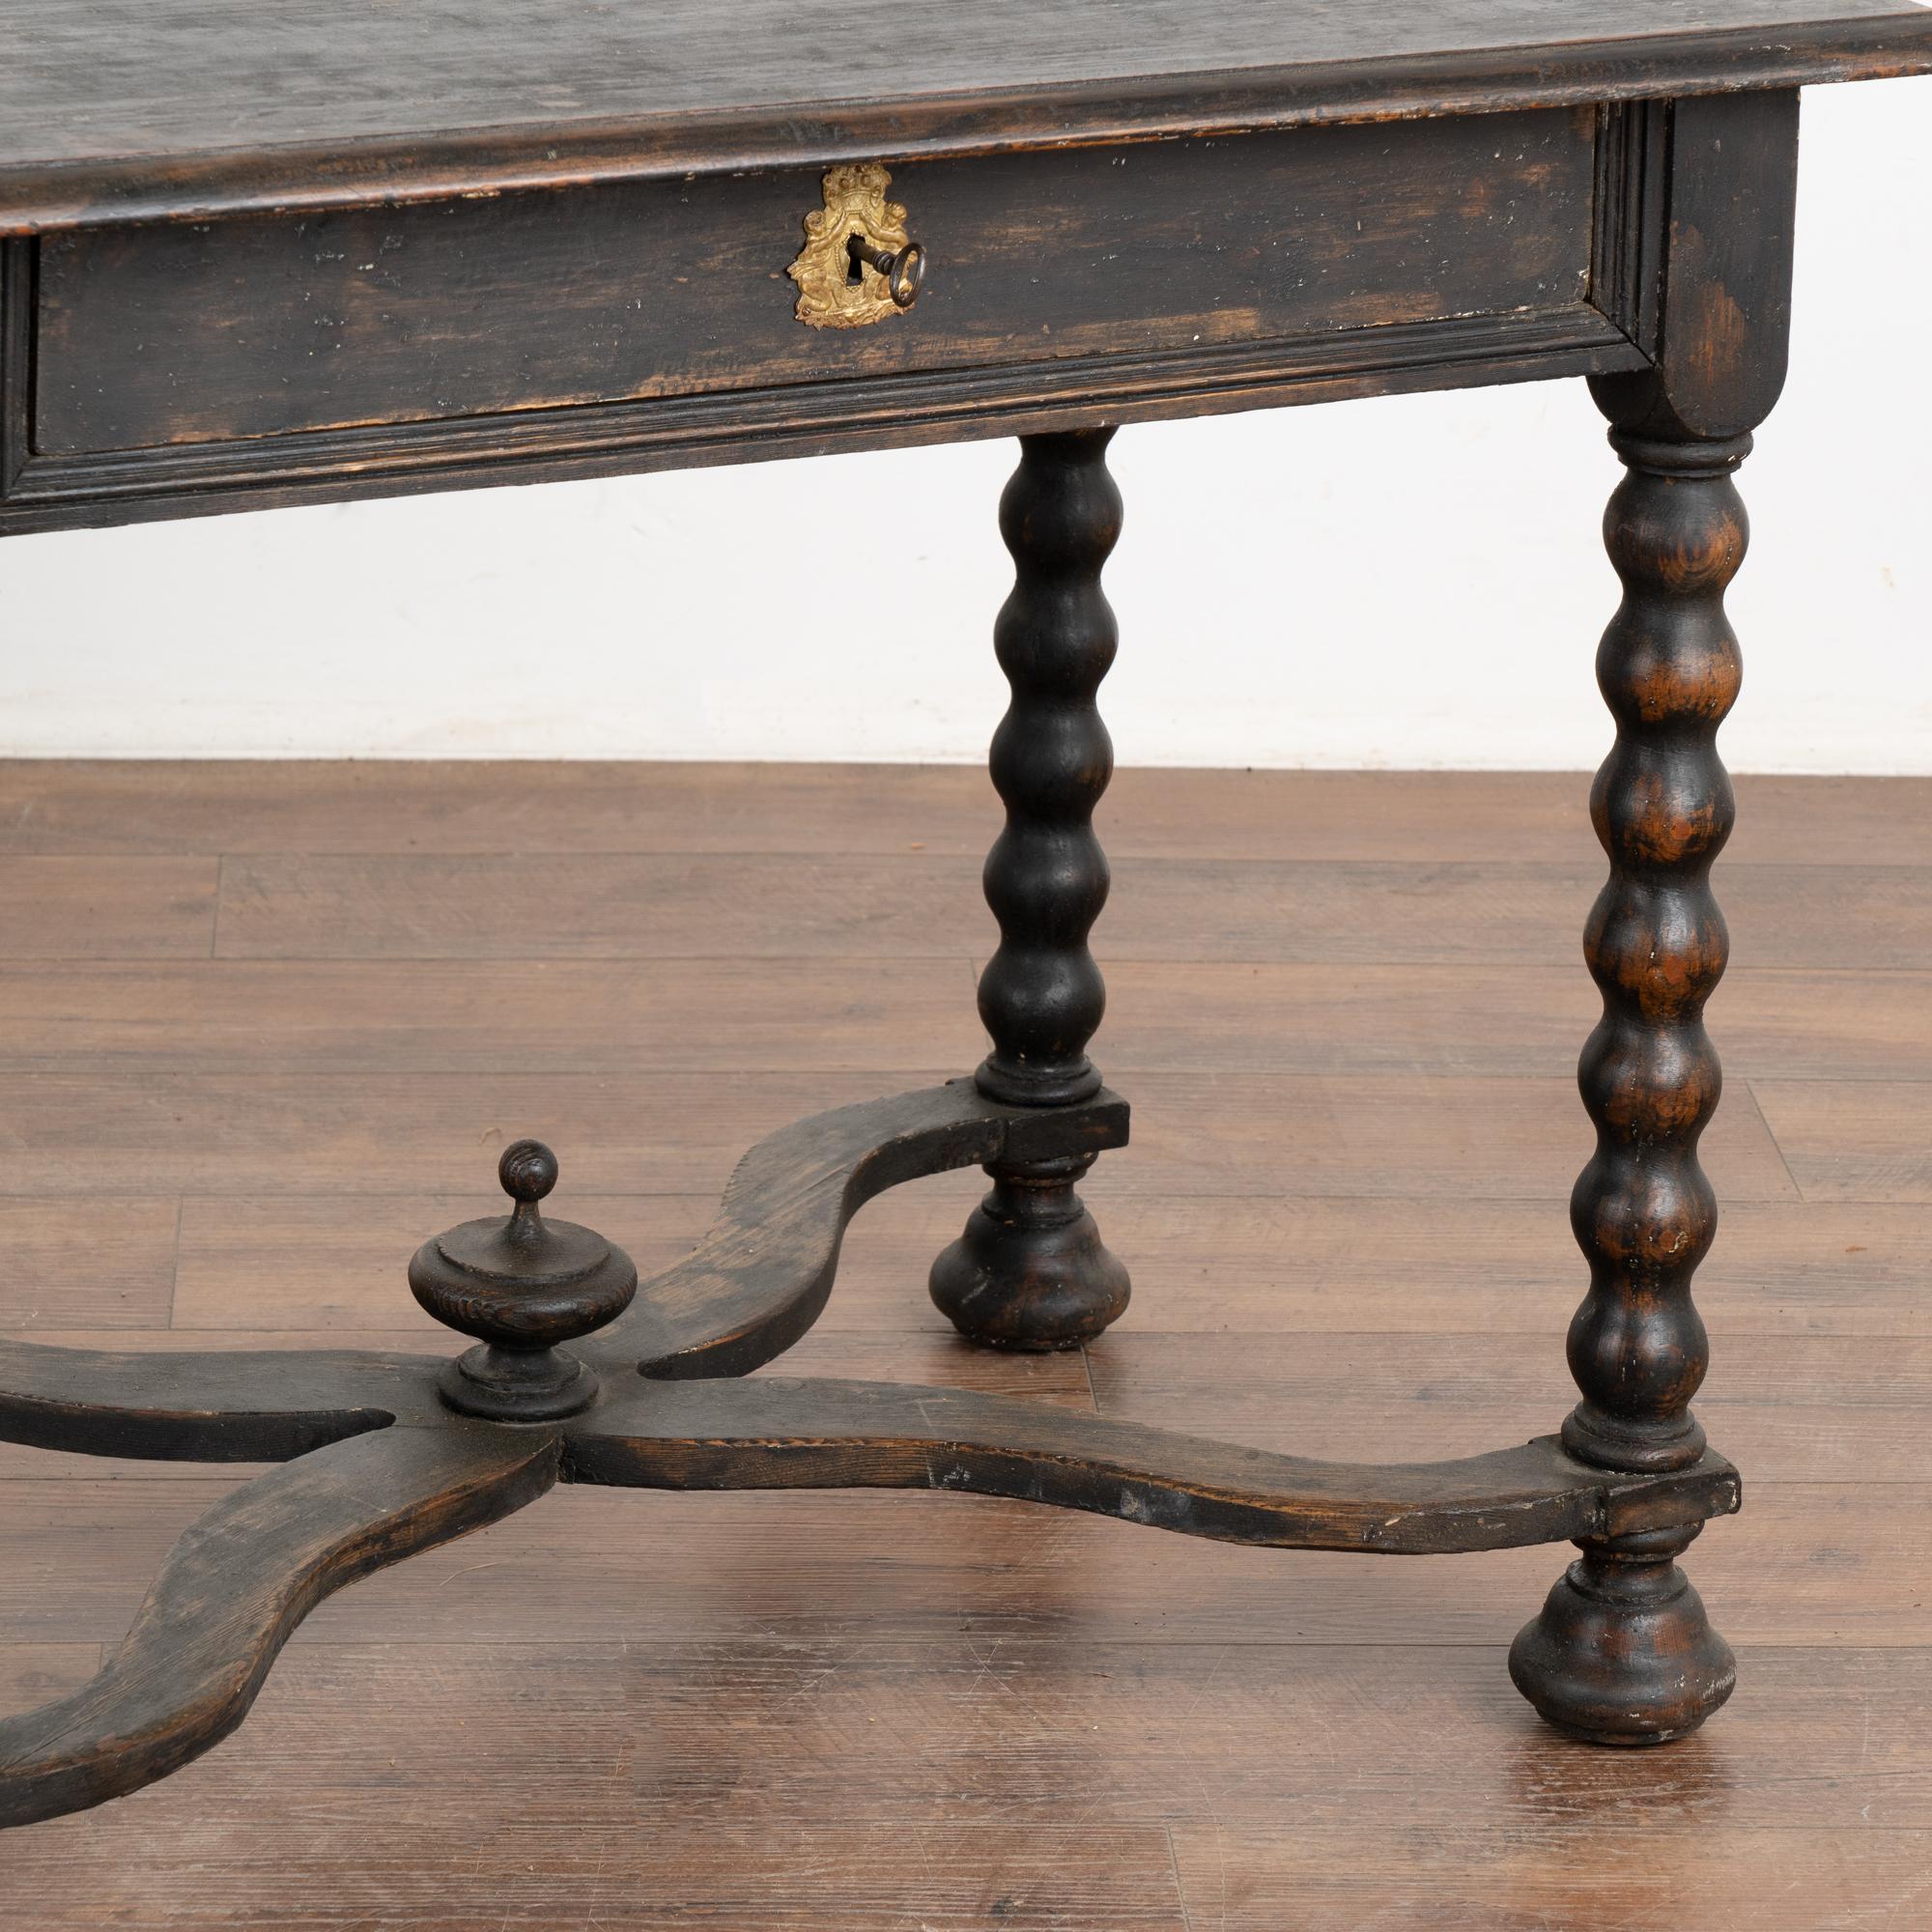 19th Century Black Painted Side Table With Turned Legs, Sweden circa 1840